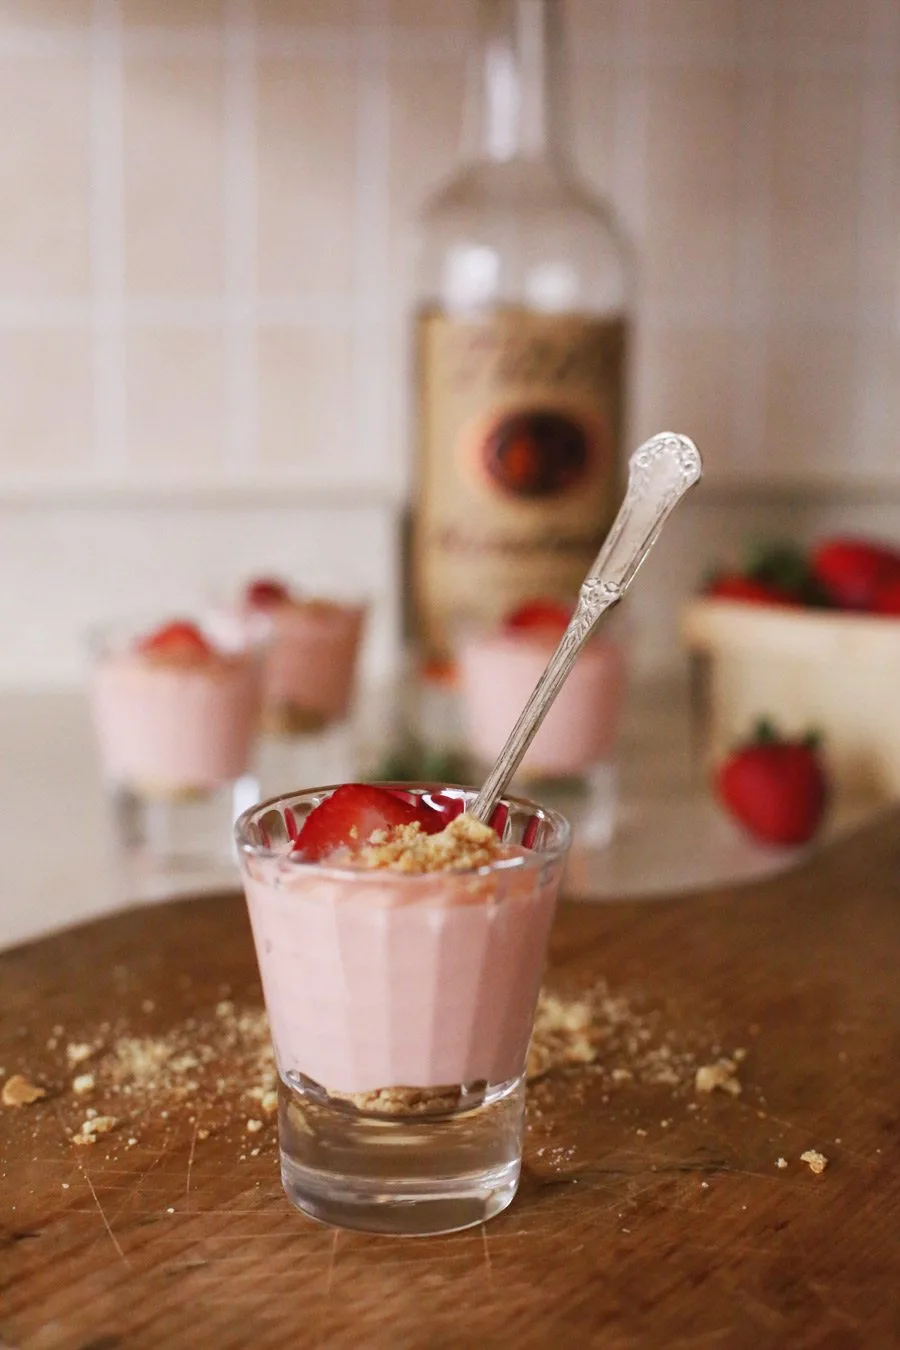 Strawberry Cheesecake Pudding Shots | Recipe at The Sweetest Occasion